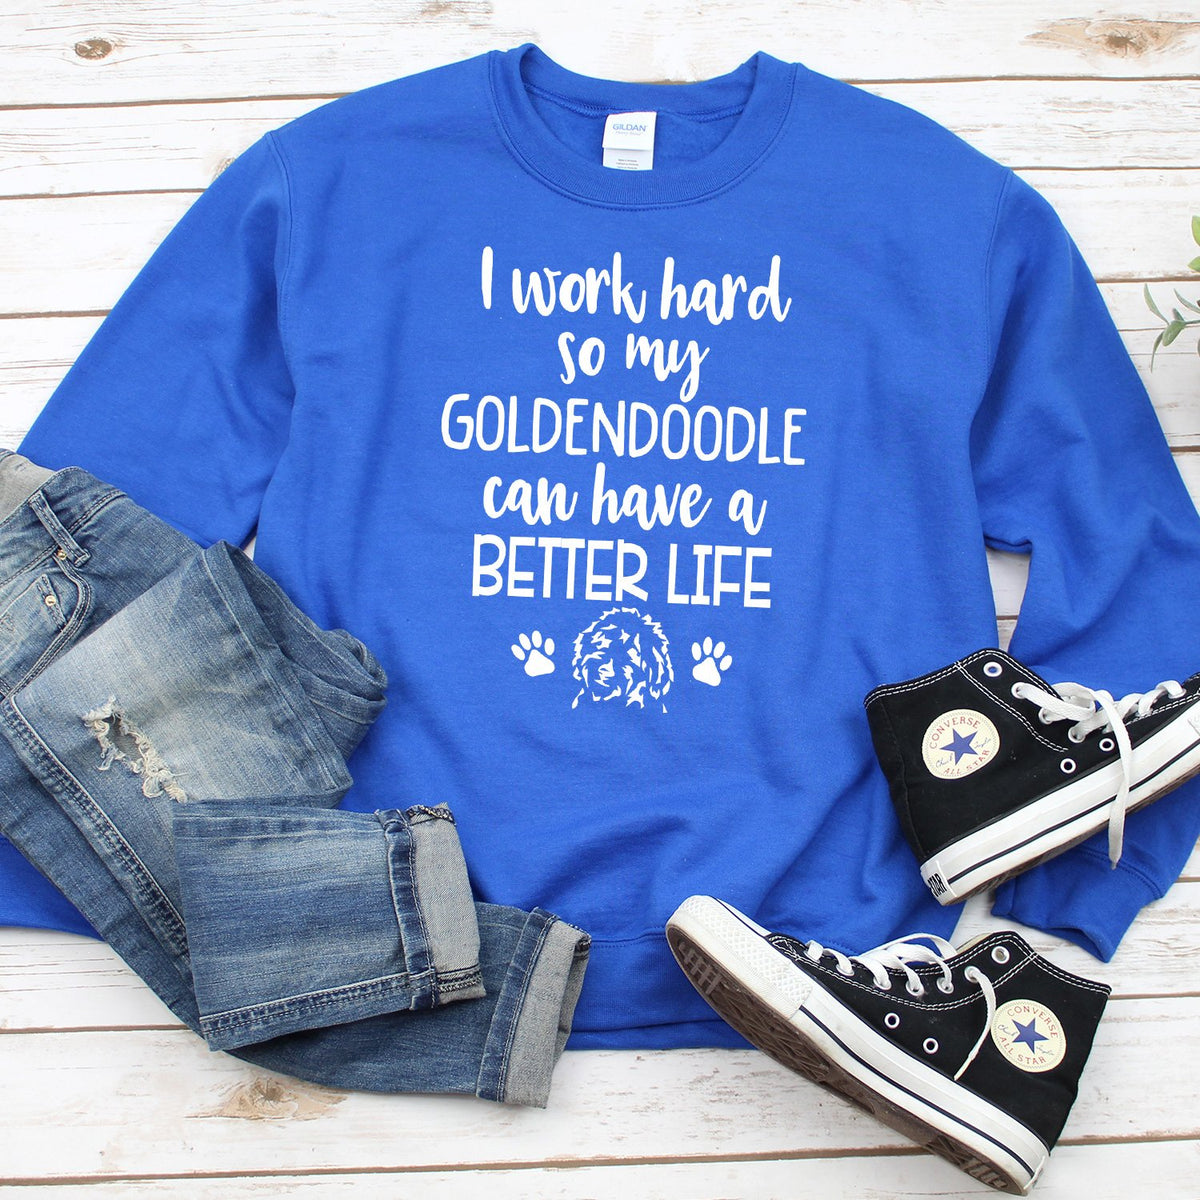 I Work Hard So My Goldendoodle Can Have A Better Life - Long Sleeve Heavy Crewneck Sweatshirt